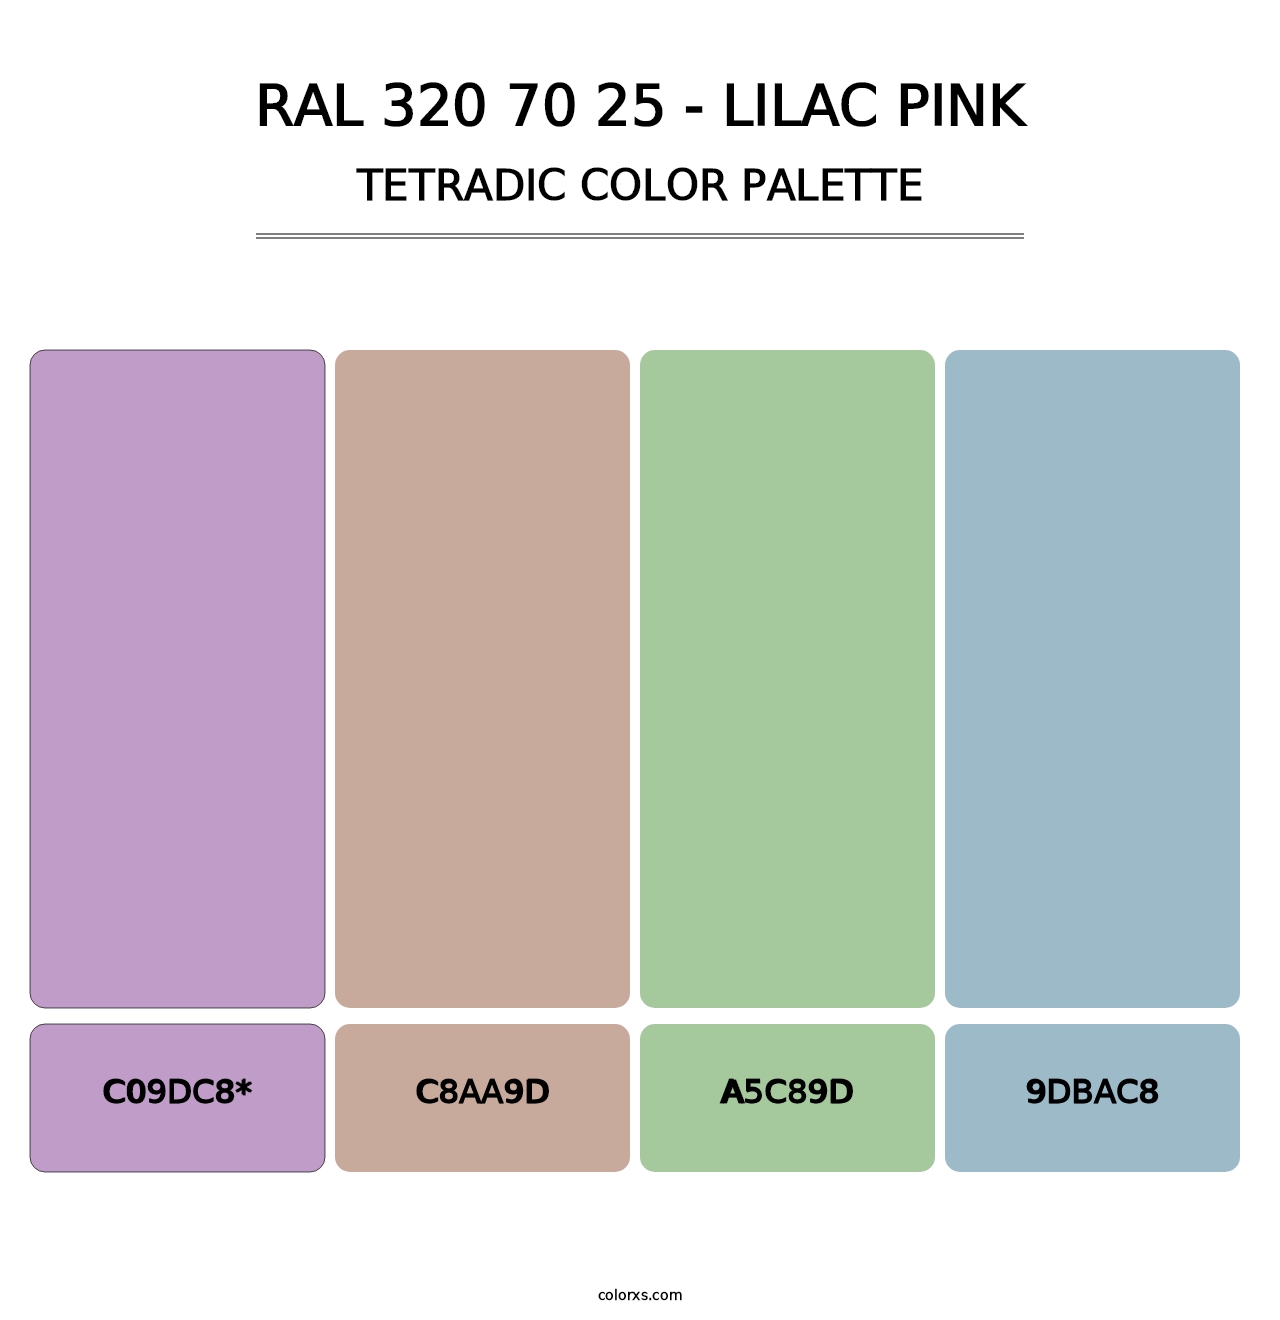 RAL 320 70 25 - Lilac Pink - Tetradic Color Palette